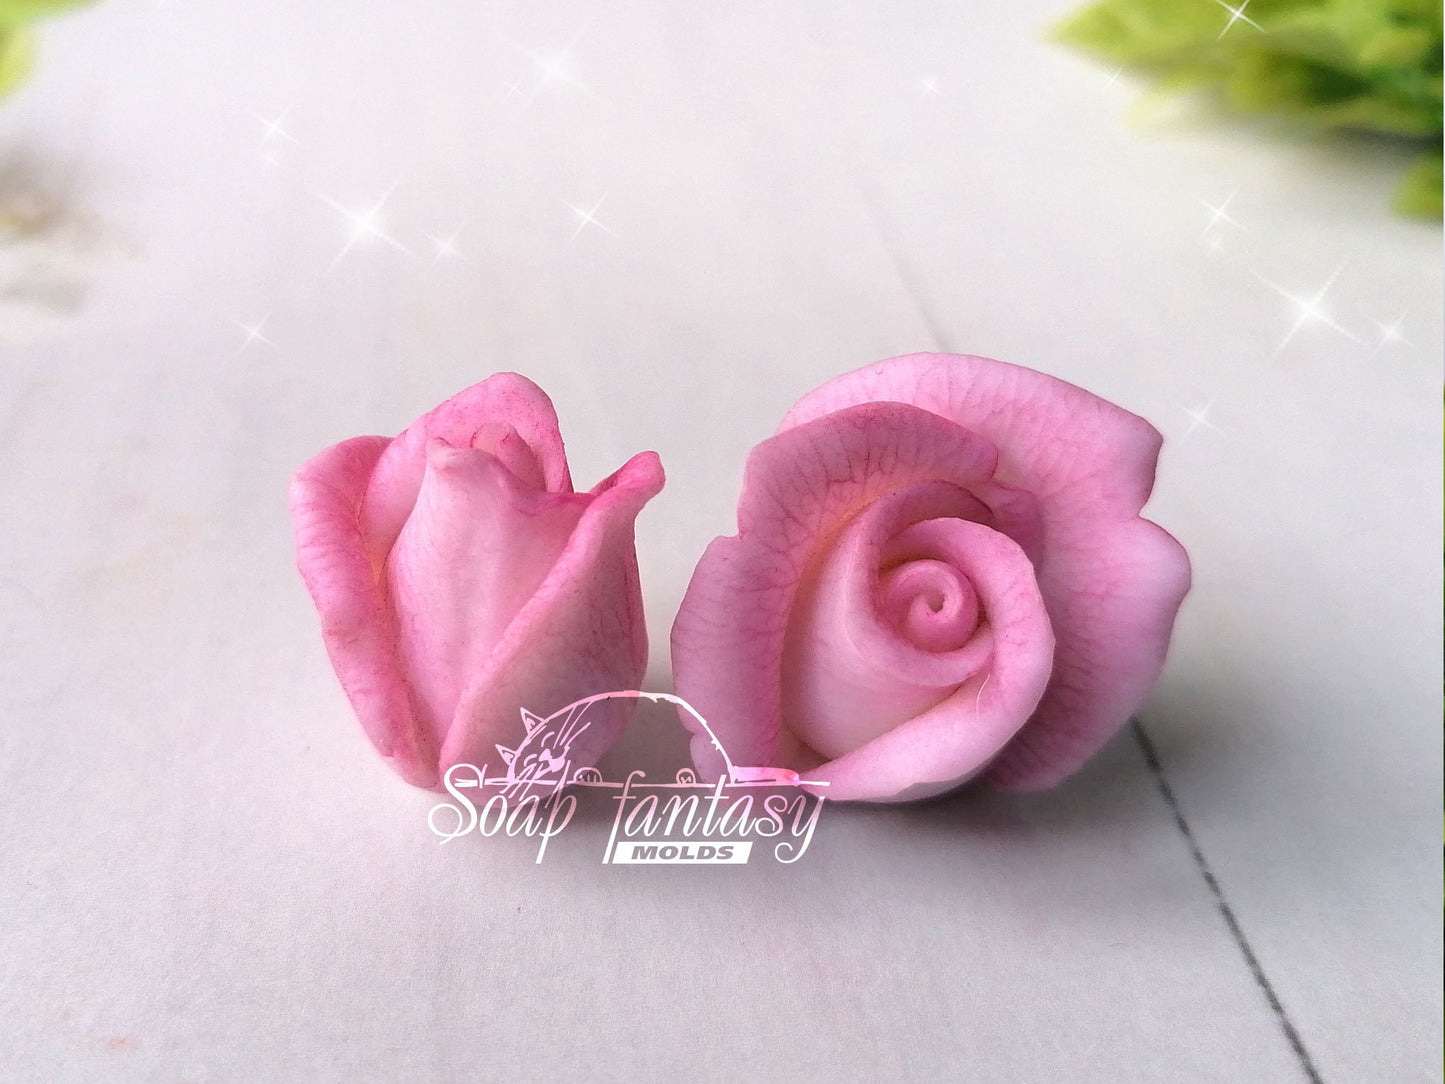 Miniature roses "Tiny sparkle" bouquet insert silicone mold for soap making